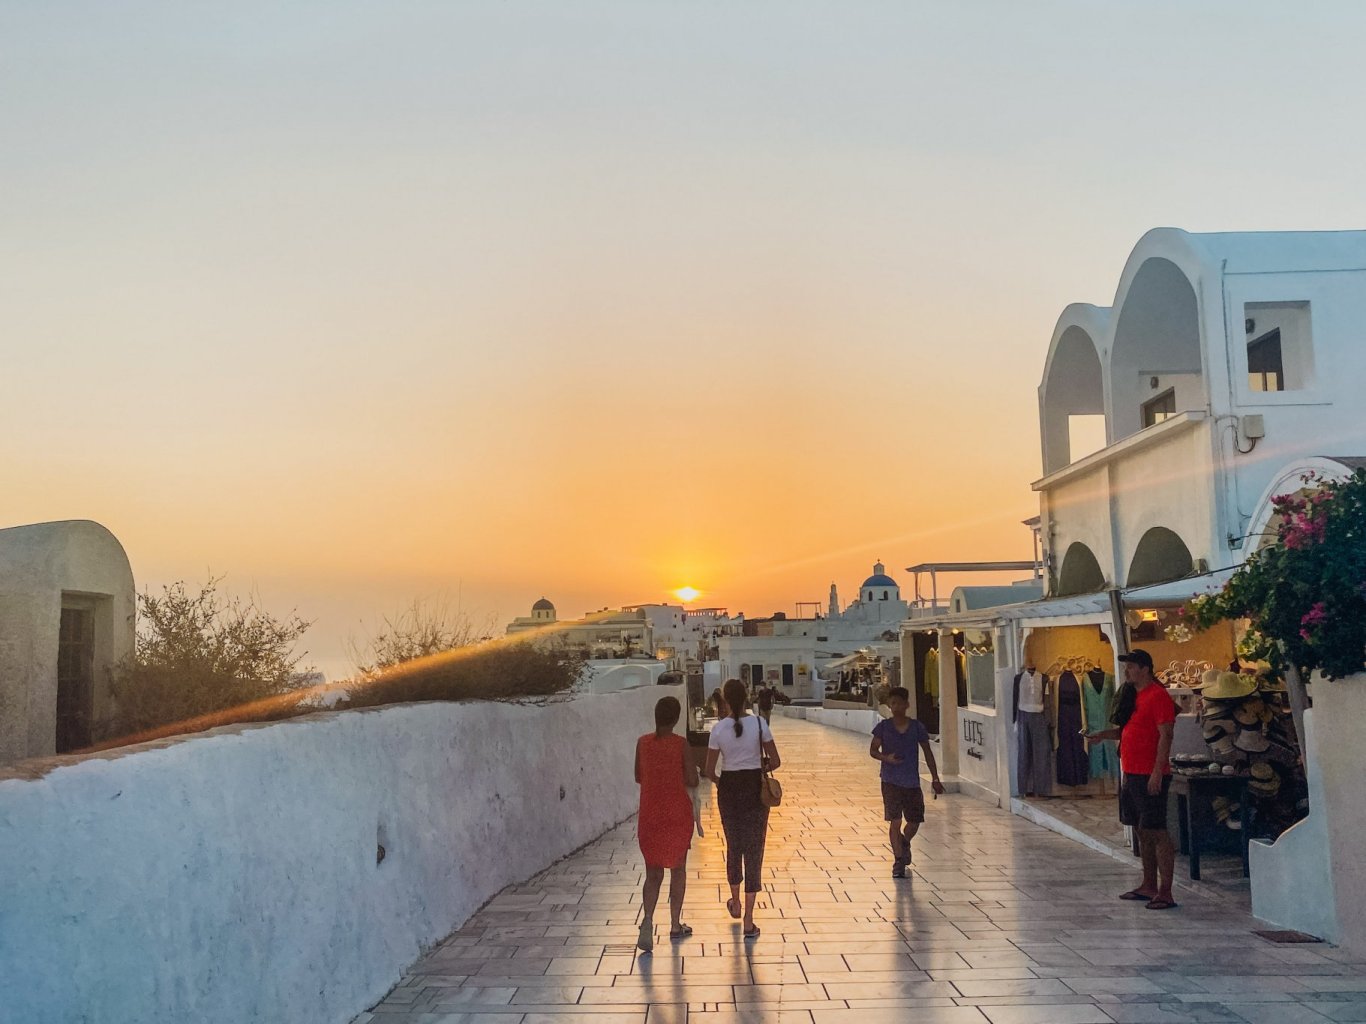 The beautiful orange sunset that Oia is known for in Santorini, Greece.